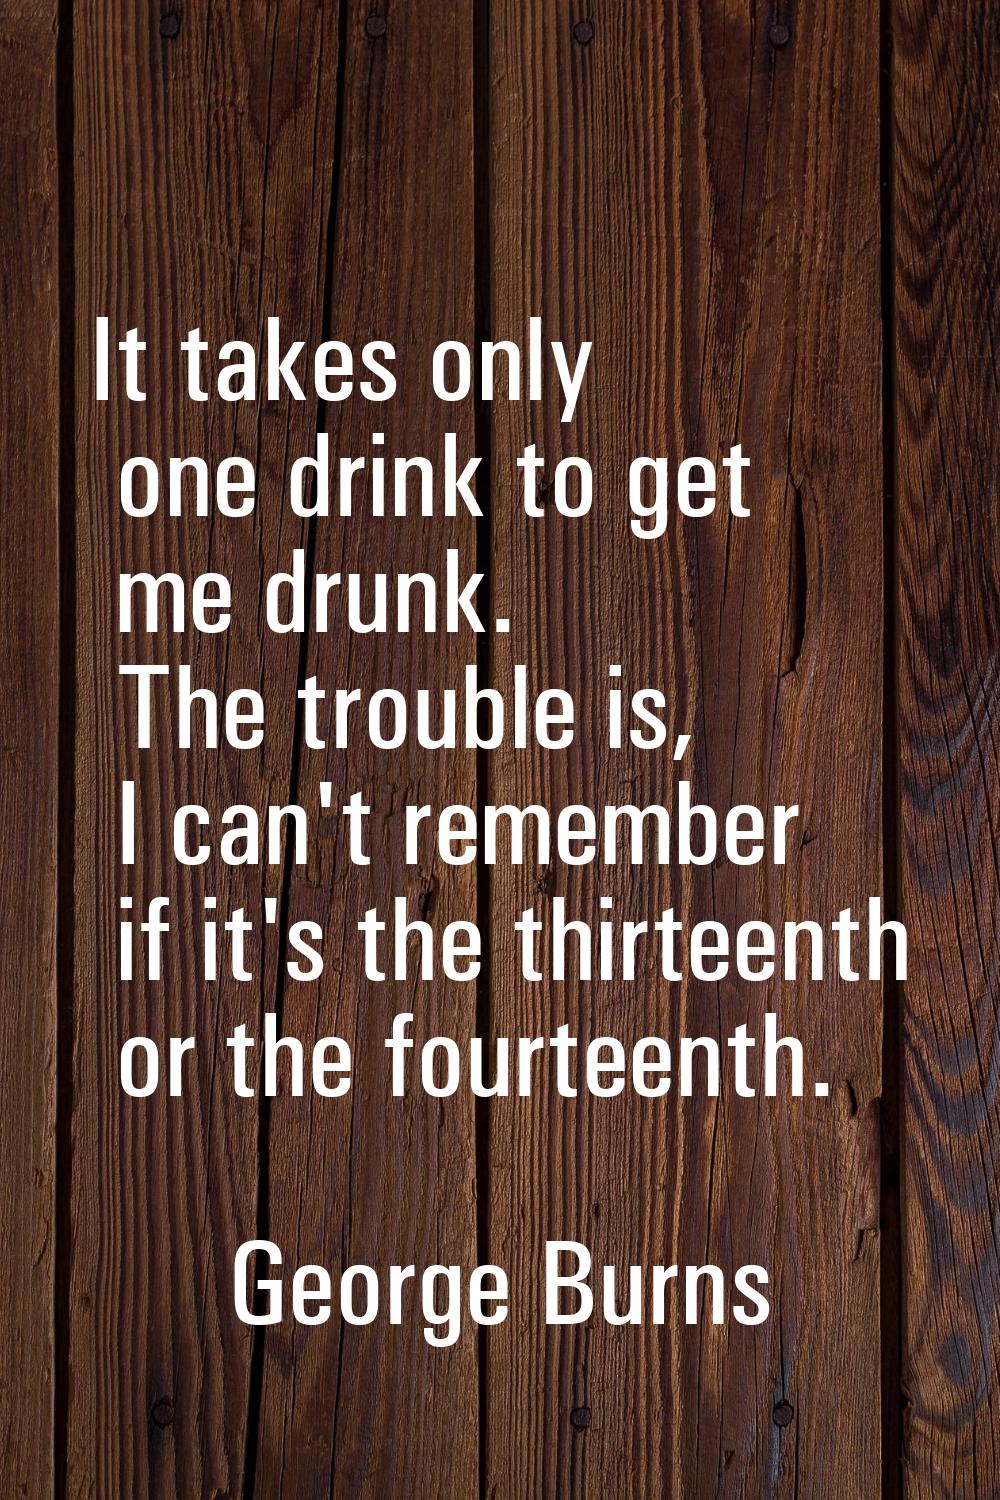 It takes only one drink to get me drunk. The trouble is, I can't remember if it's the thirteenth or